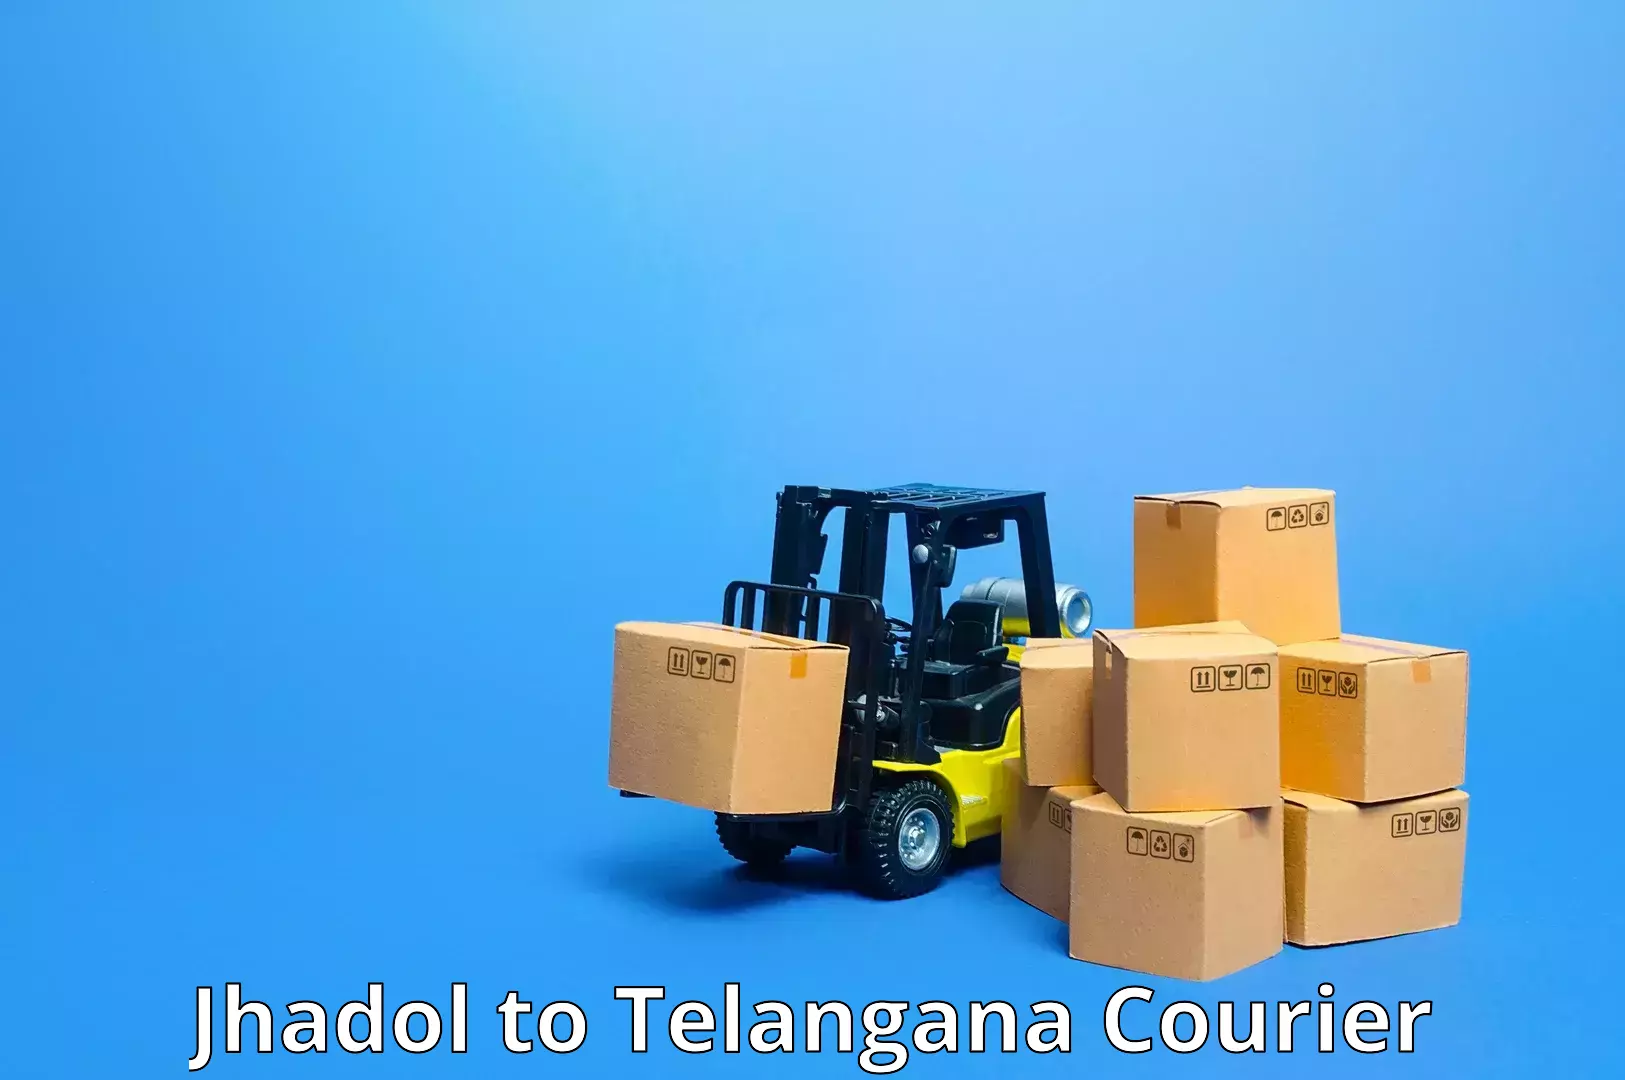 Flexible parcel services Jhadol to Bhupalpally